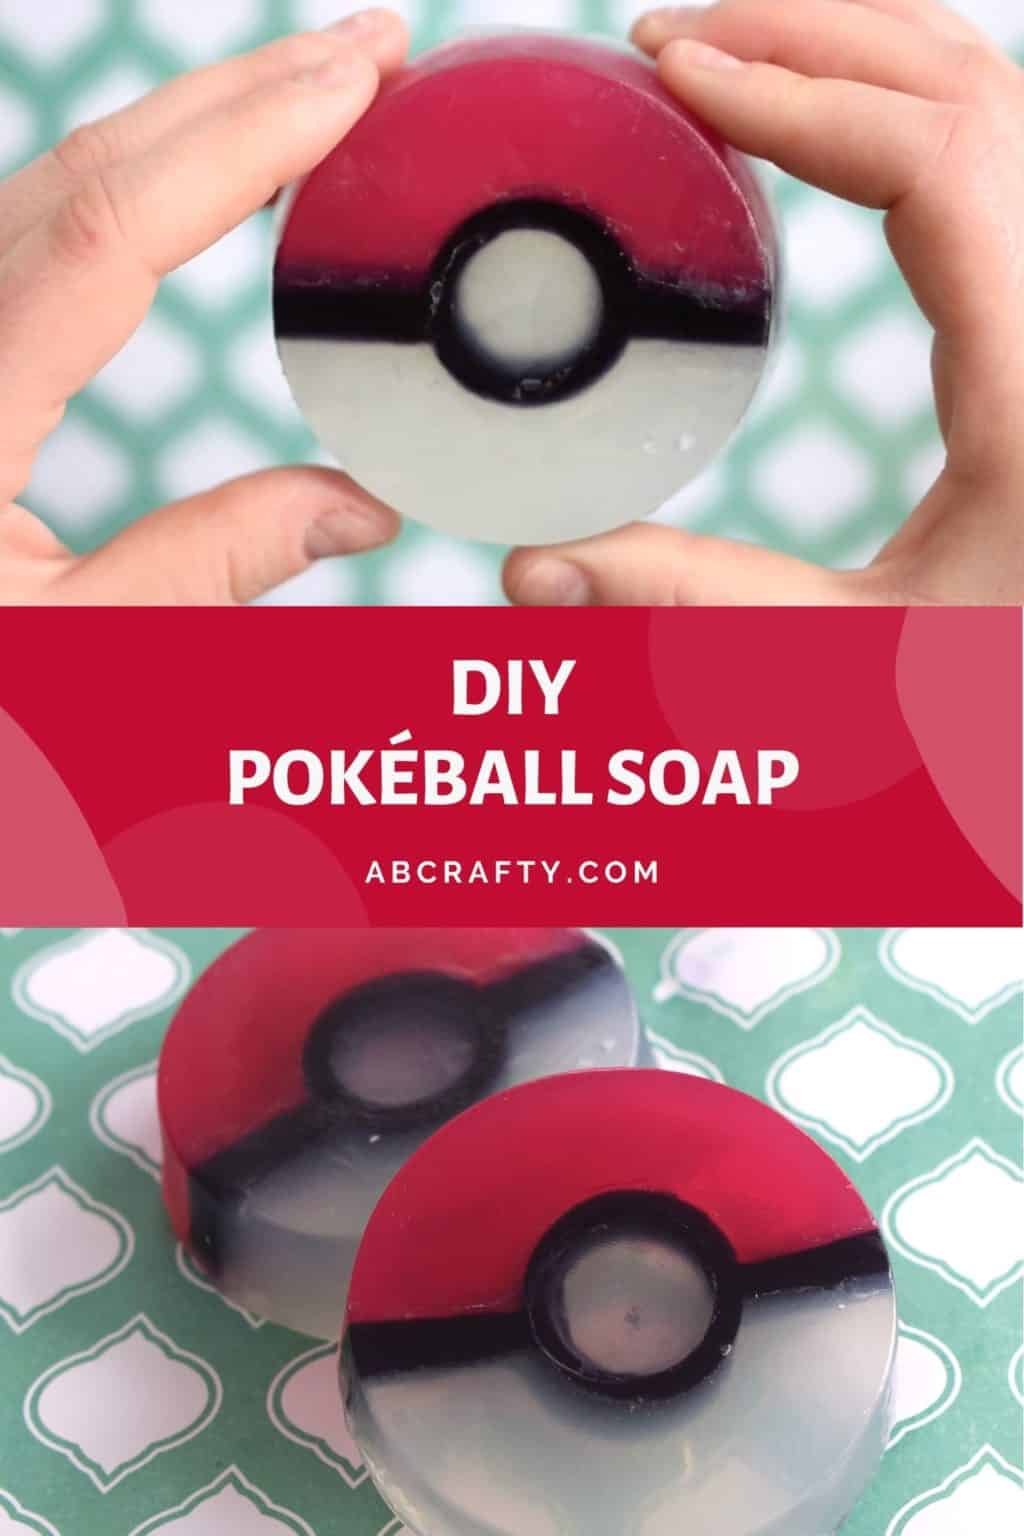 top image is holding a pokeball soap and the bottom is two of the pokemon soaps on the table with the title 'diy pokeball soap, abcrafty.com'